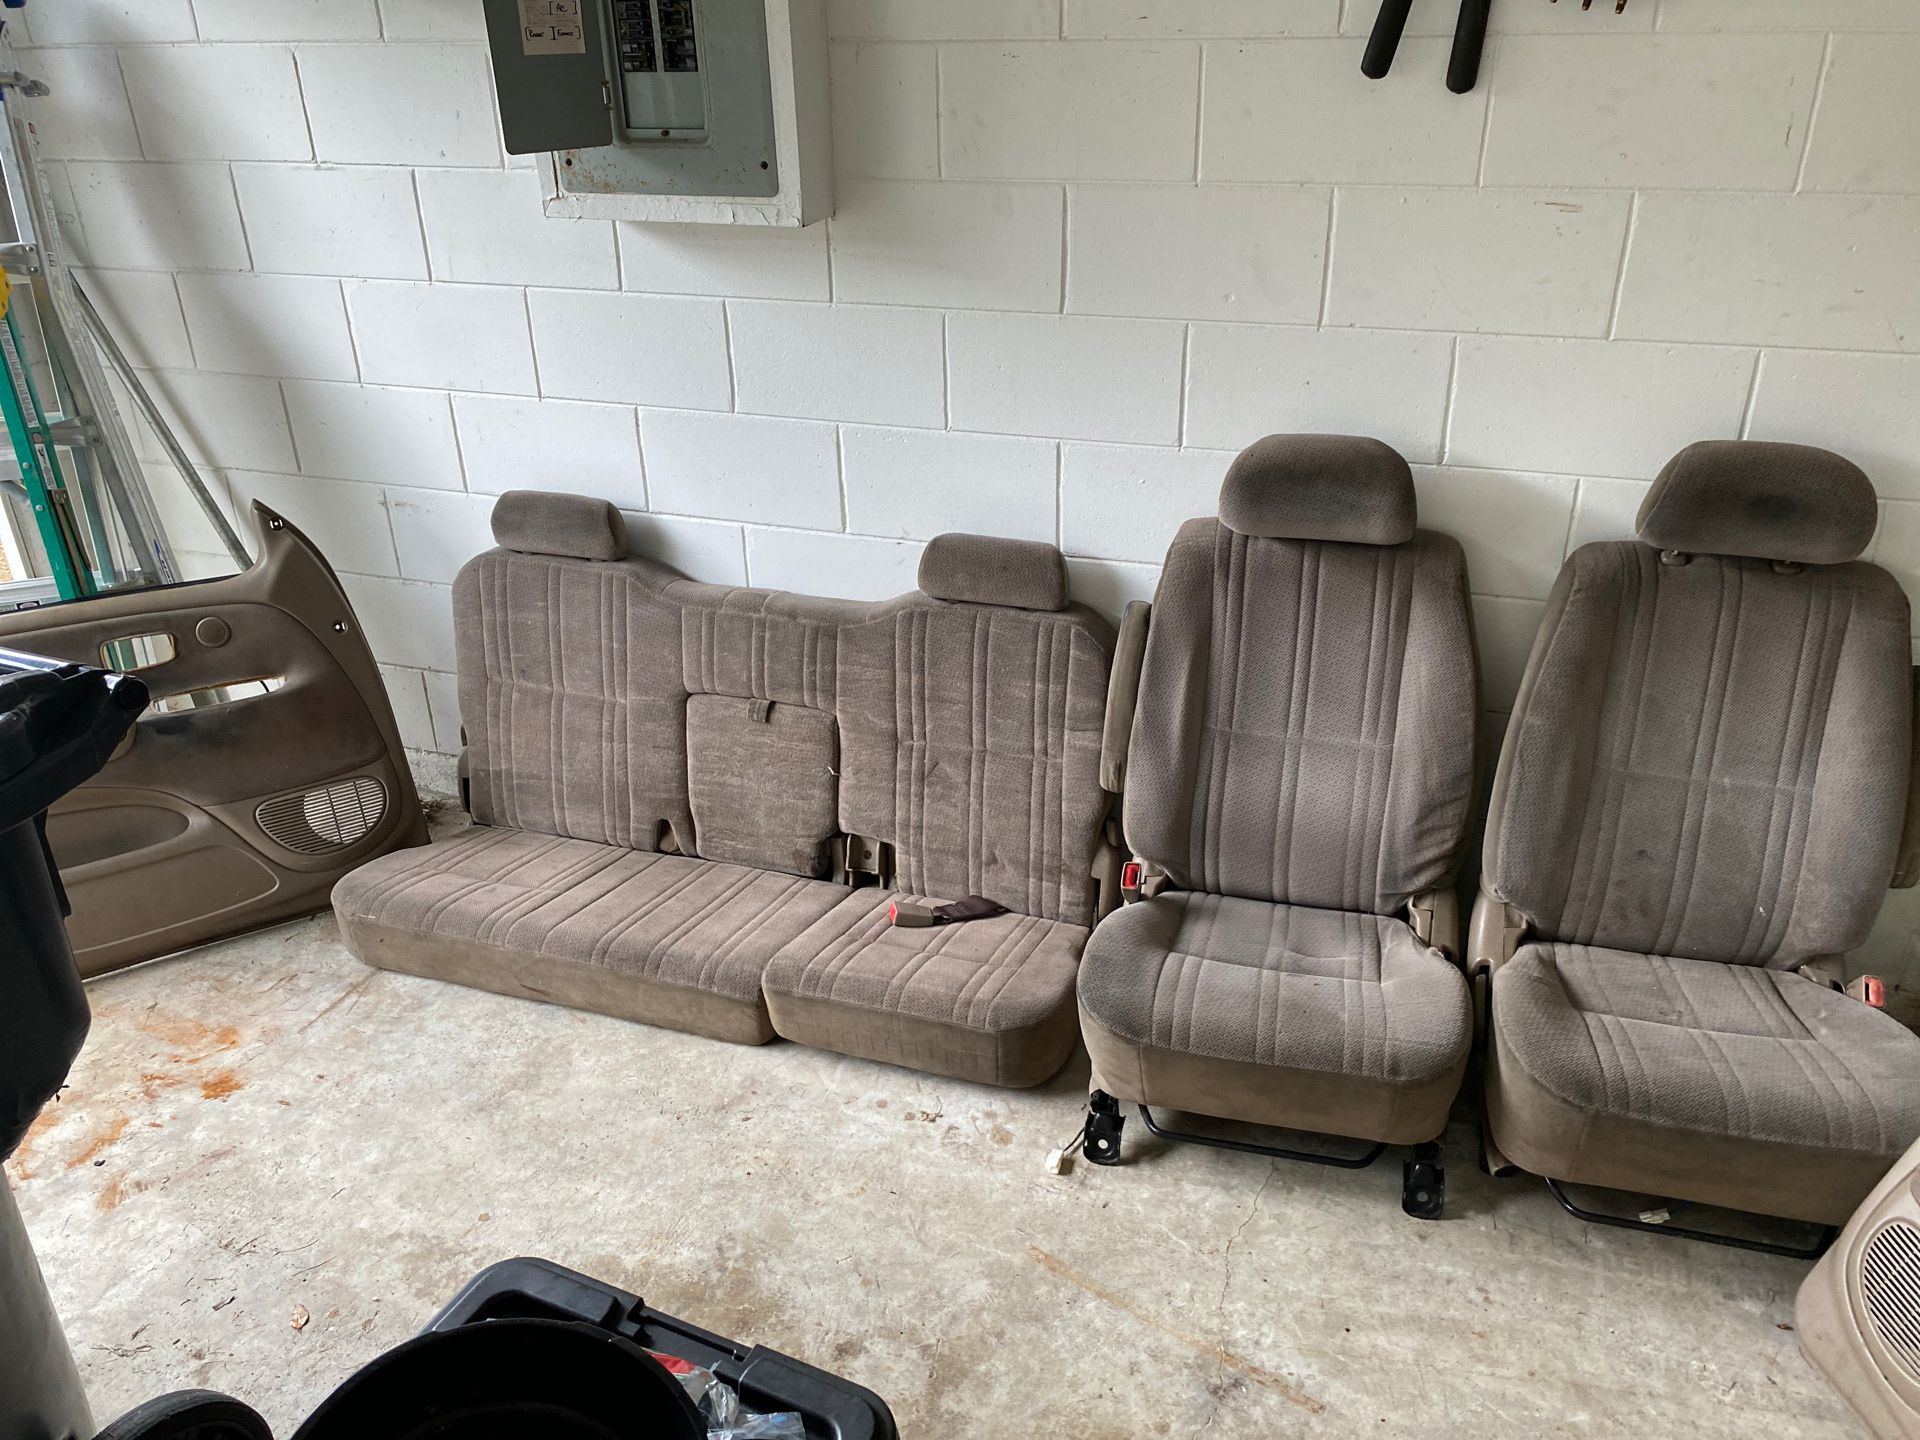 00-06 Toyota Tundra Complete Interior Set “For Free”